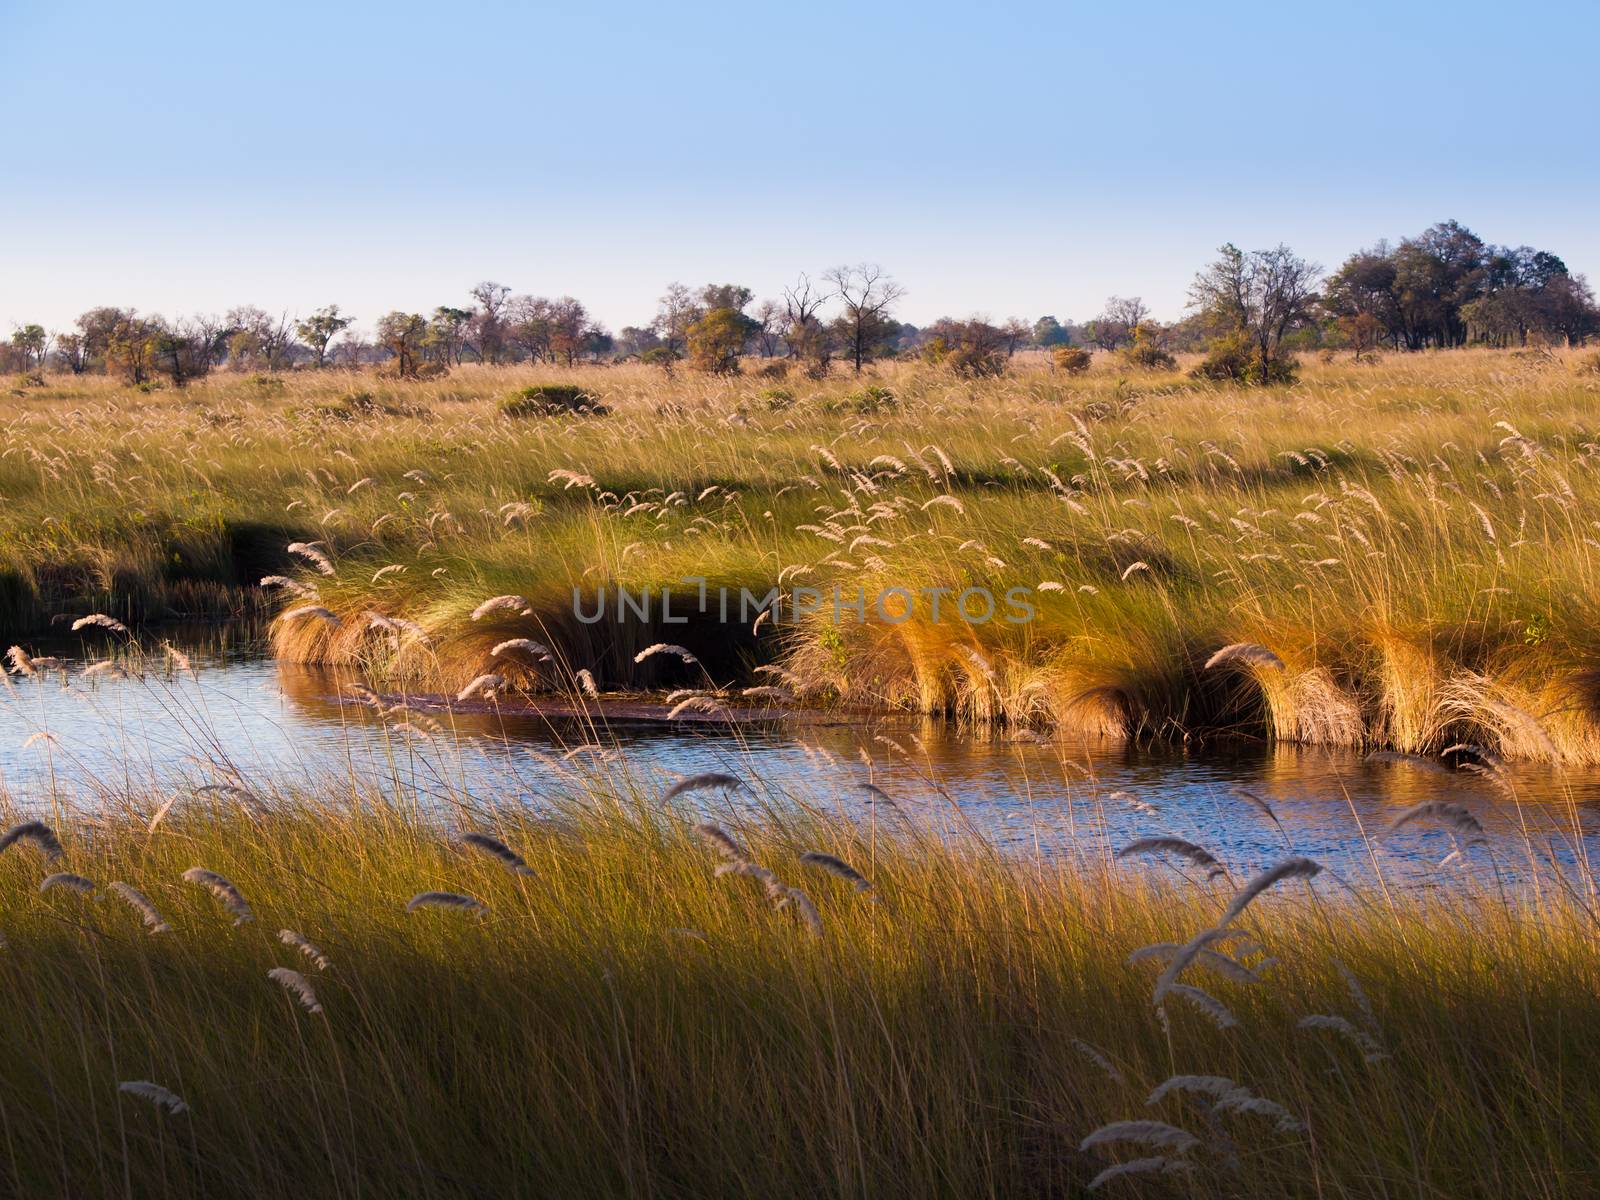 Landscape at Okavango river by pyty